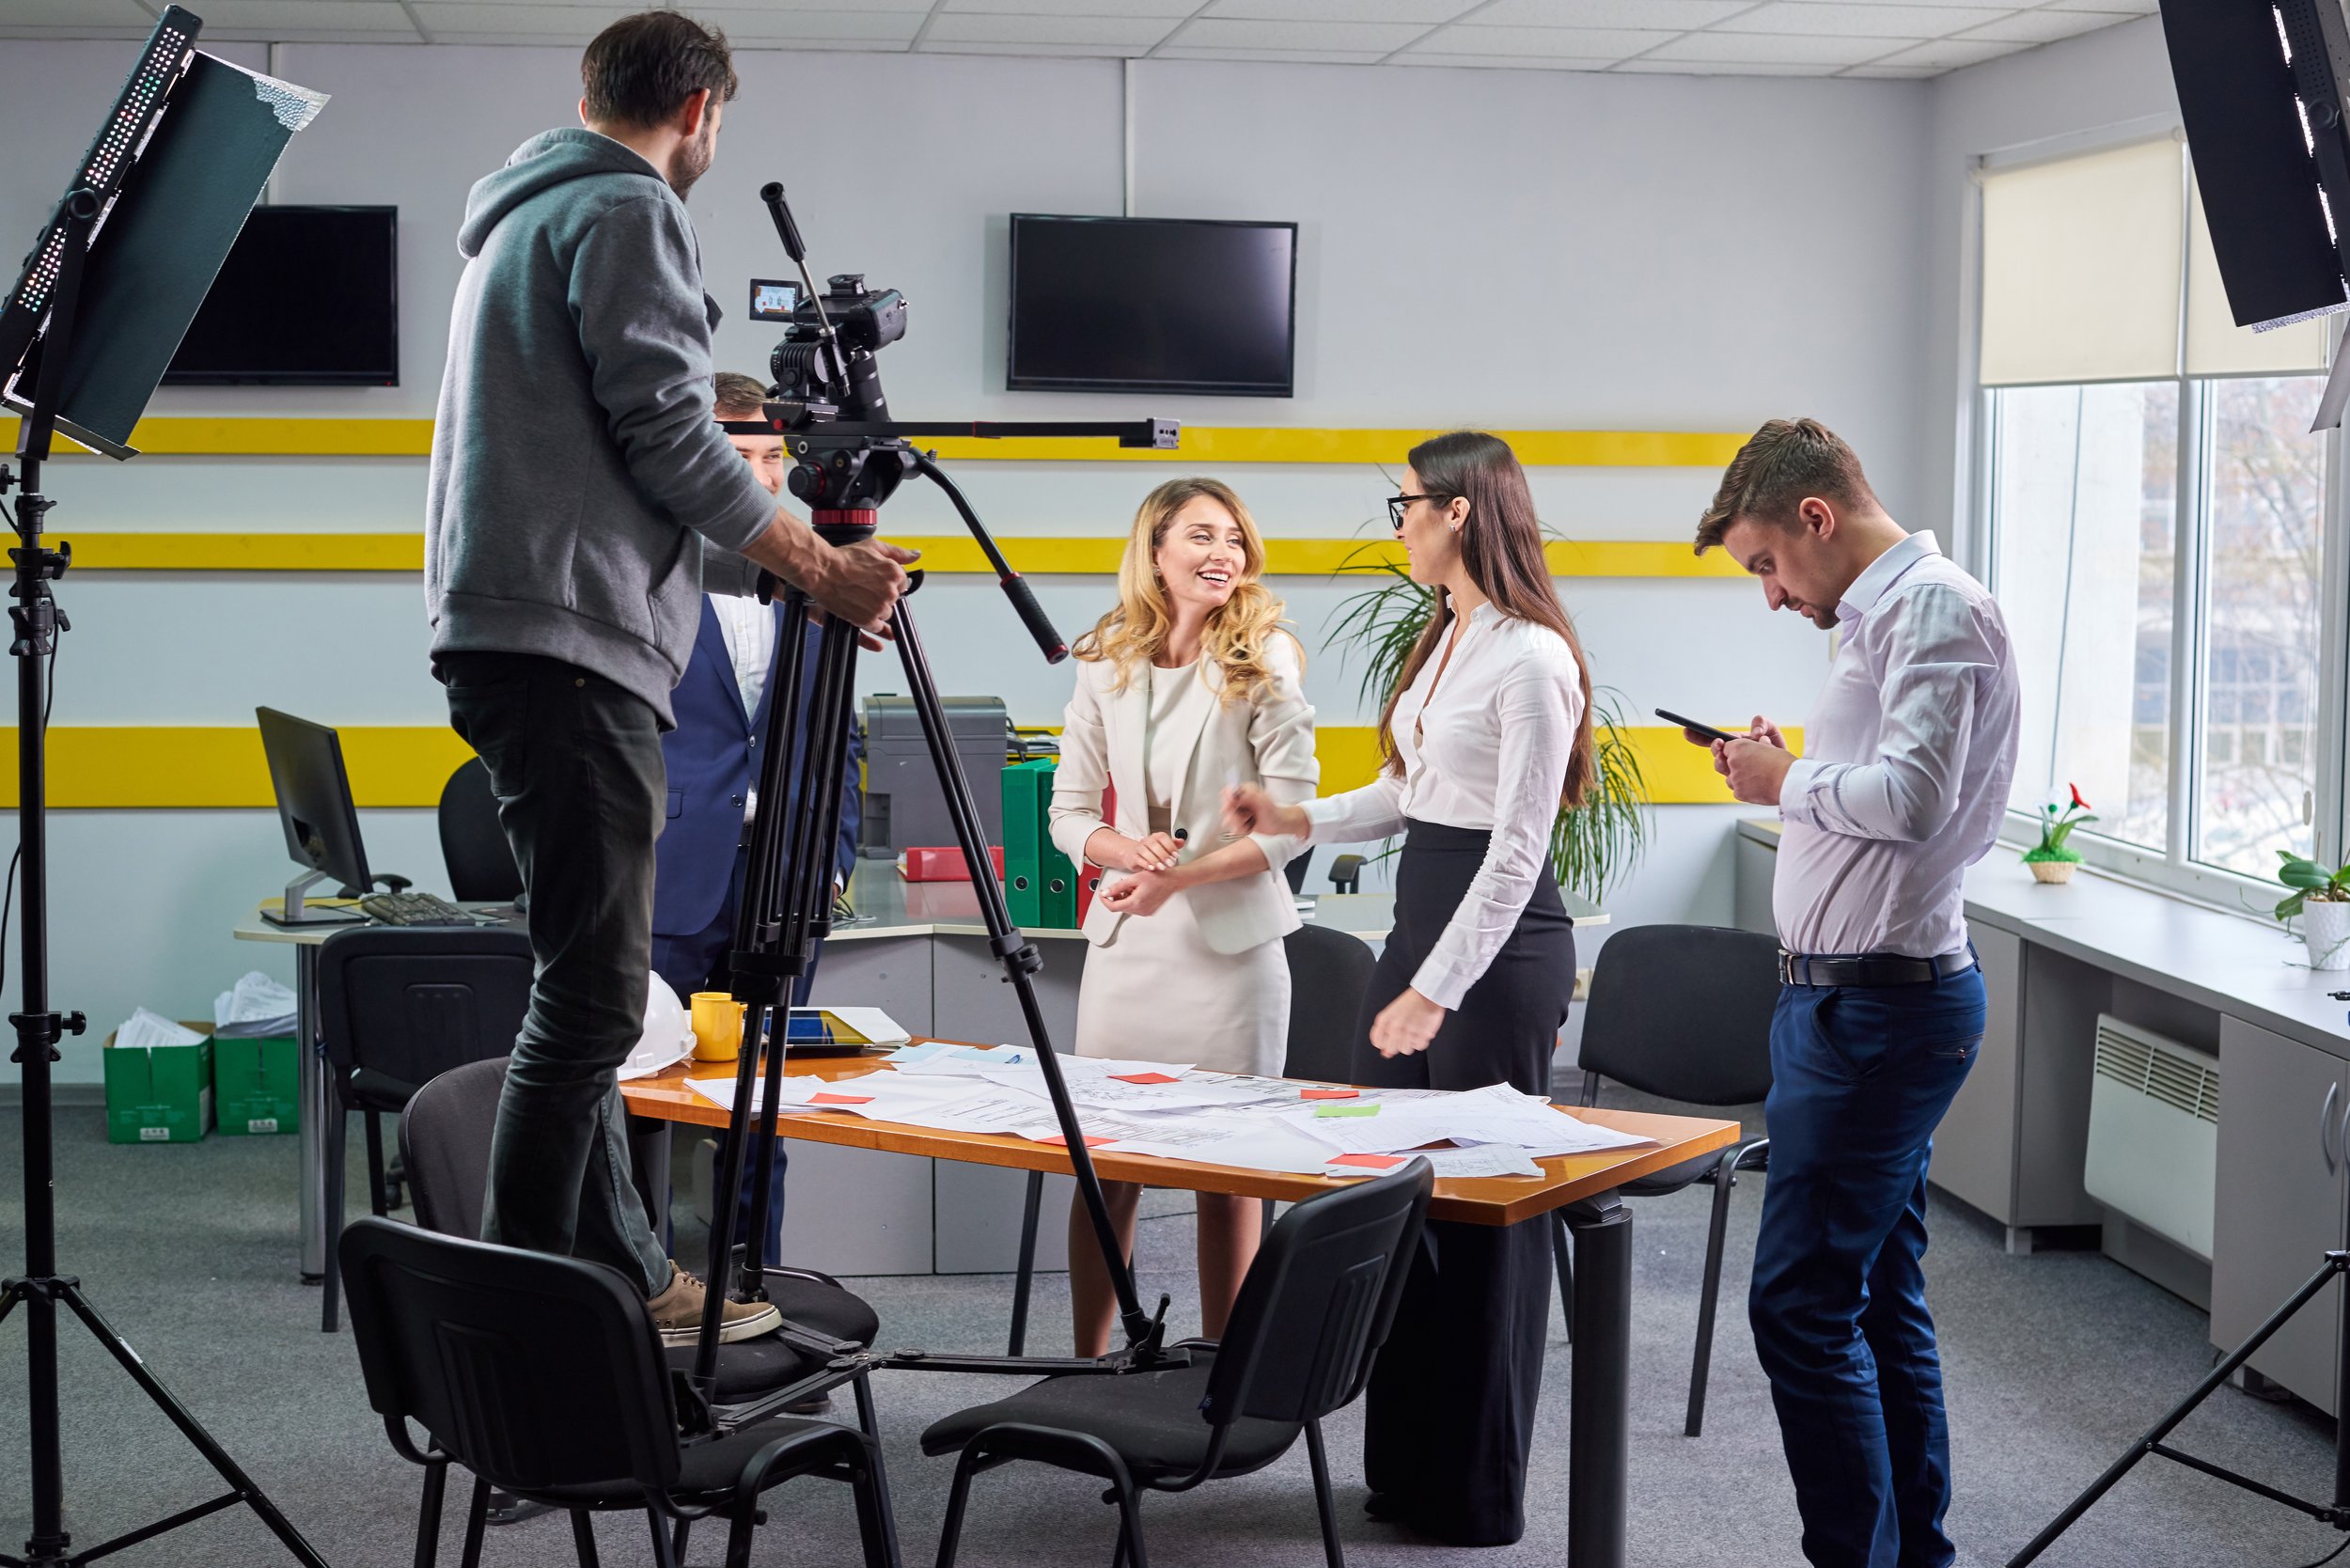 How Can Video Production Help Businesses Save Time and Money?